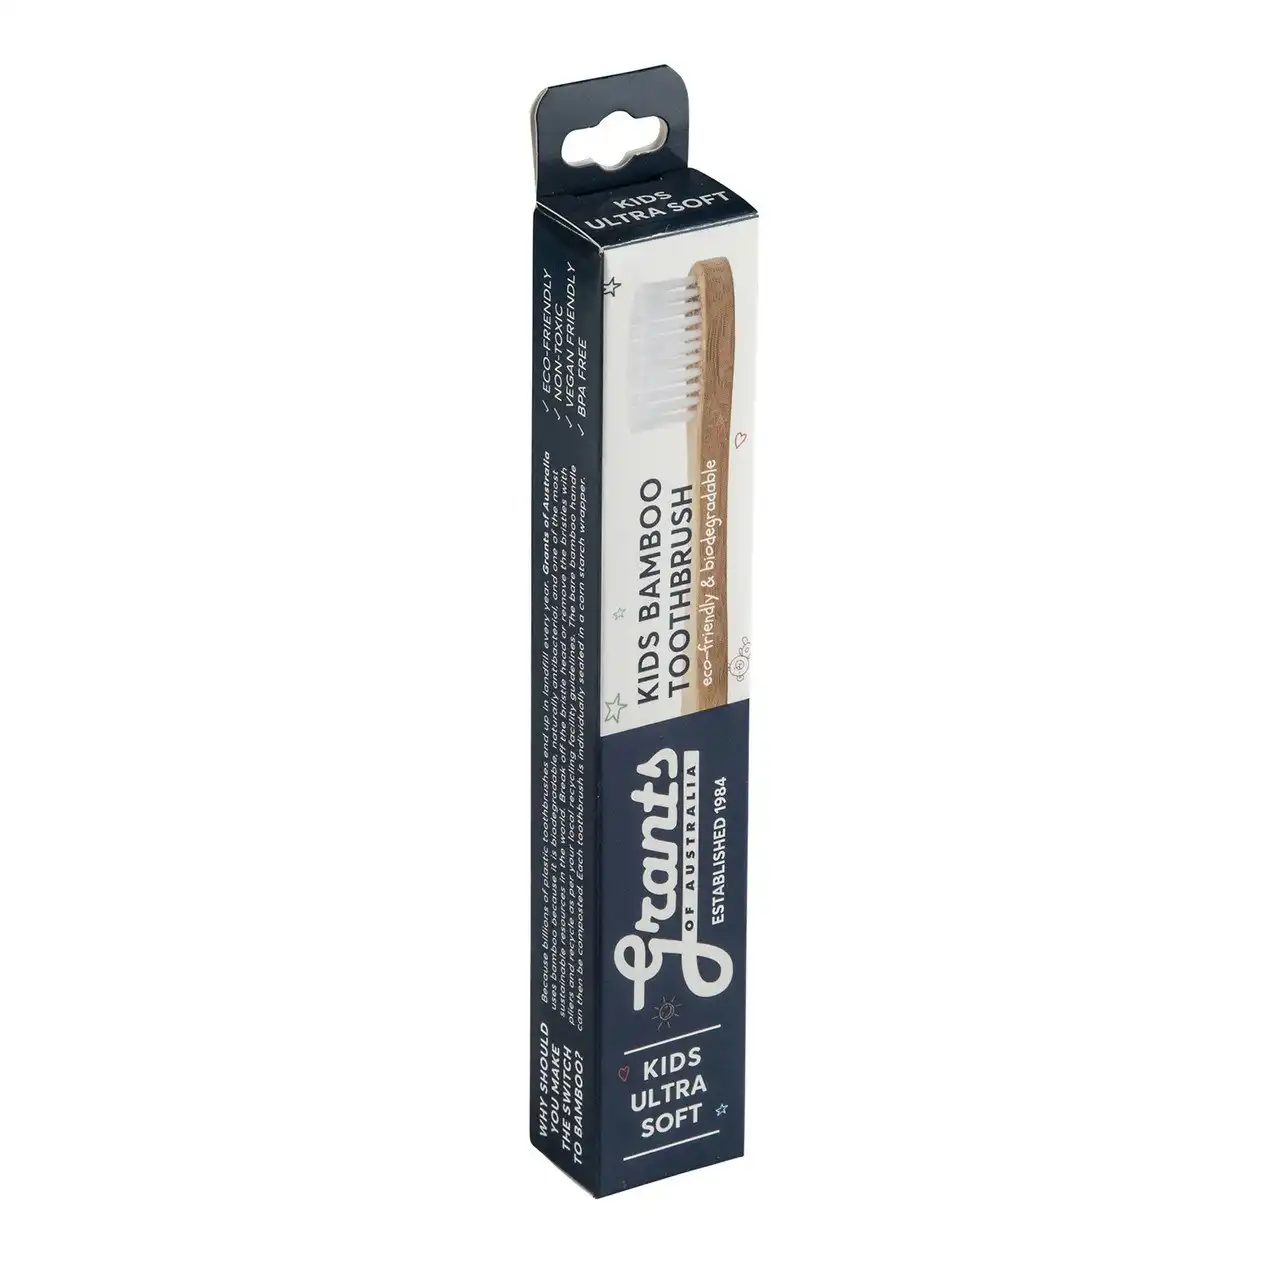 Grant's Bamboo Kids Ultra Soft Toothbrush